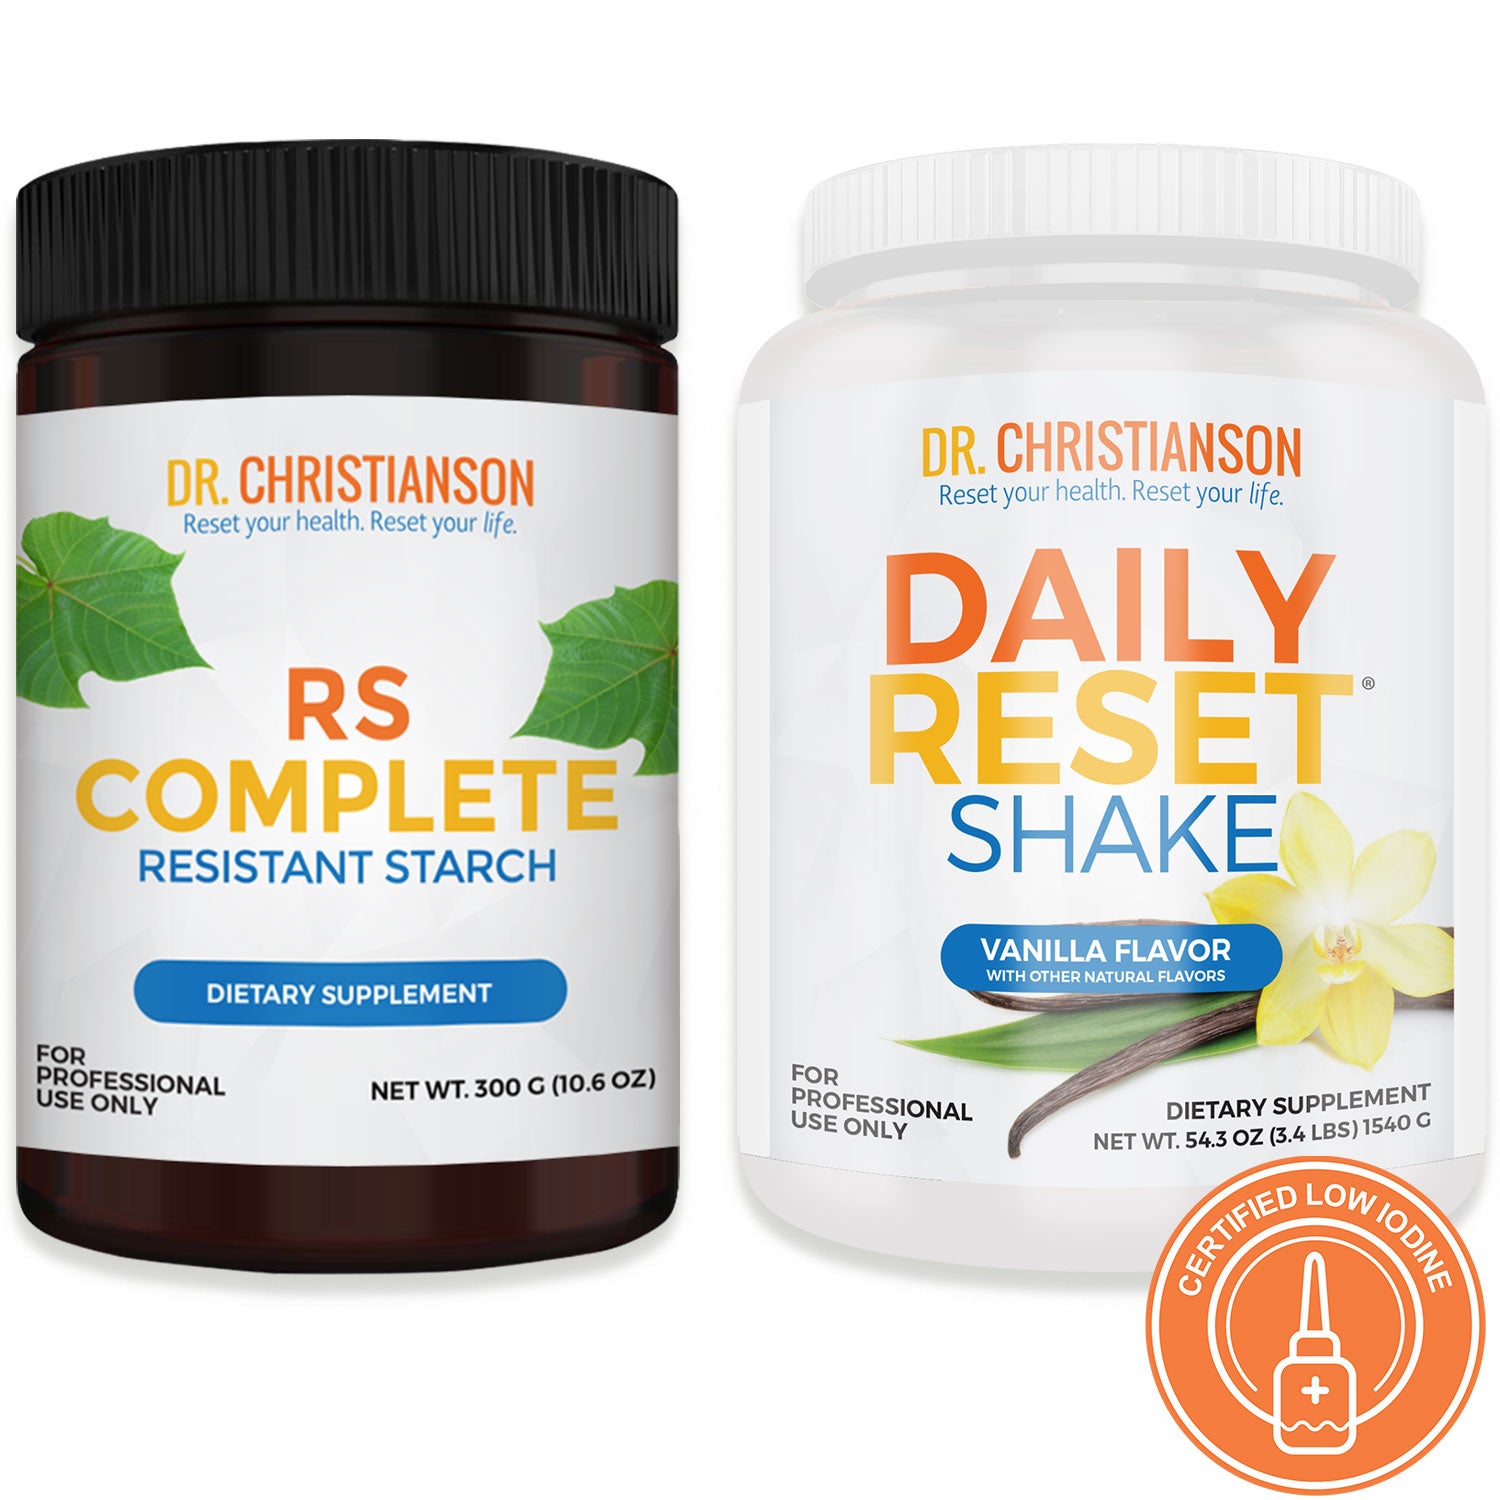 Daily Reset Shake & RS Complete Bundle AutoShip - Chocolate is out of stock